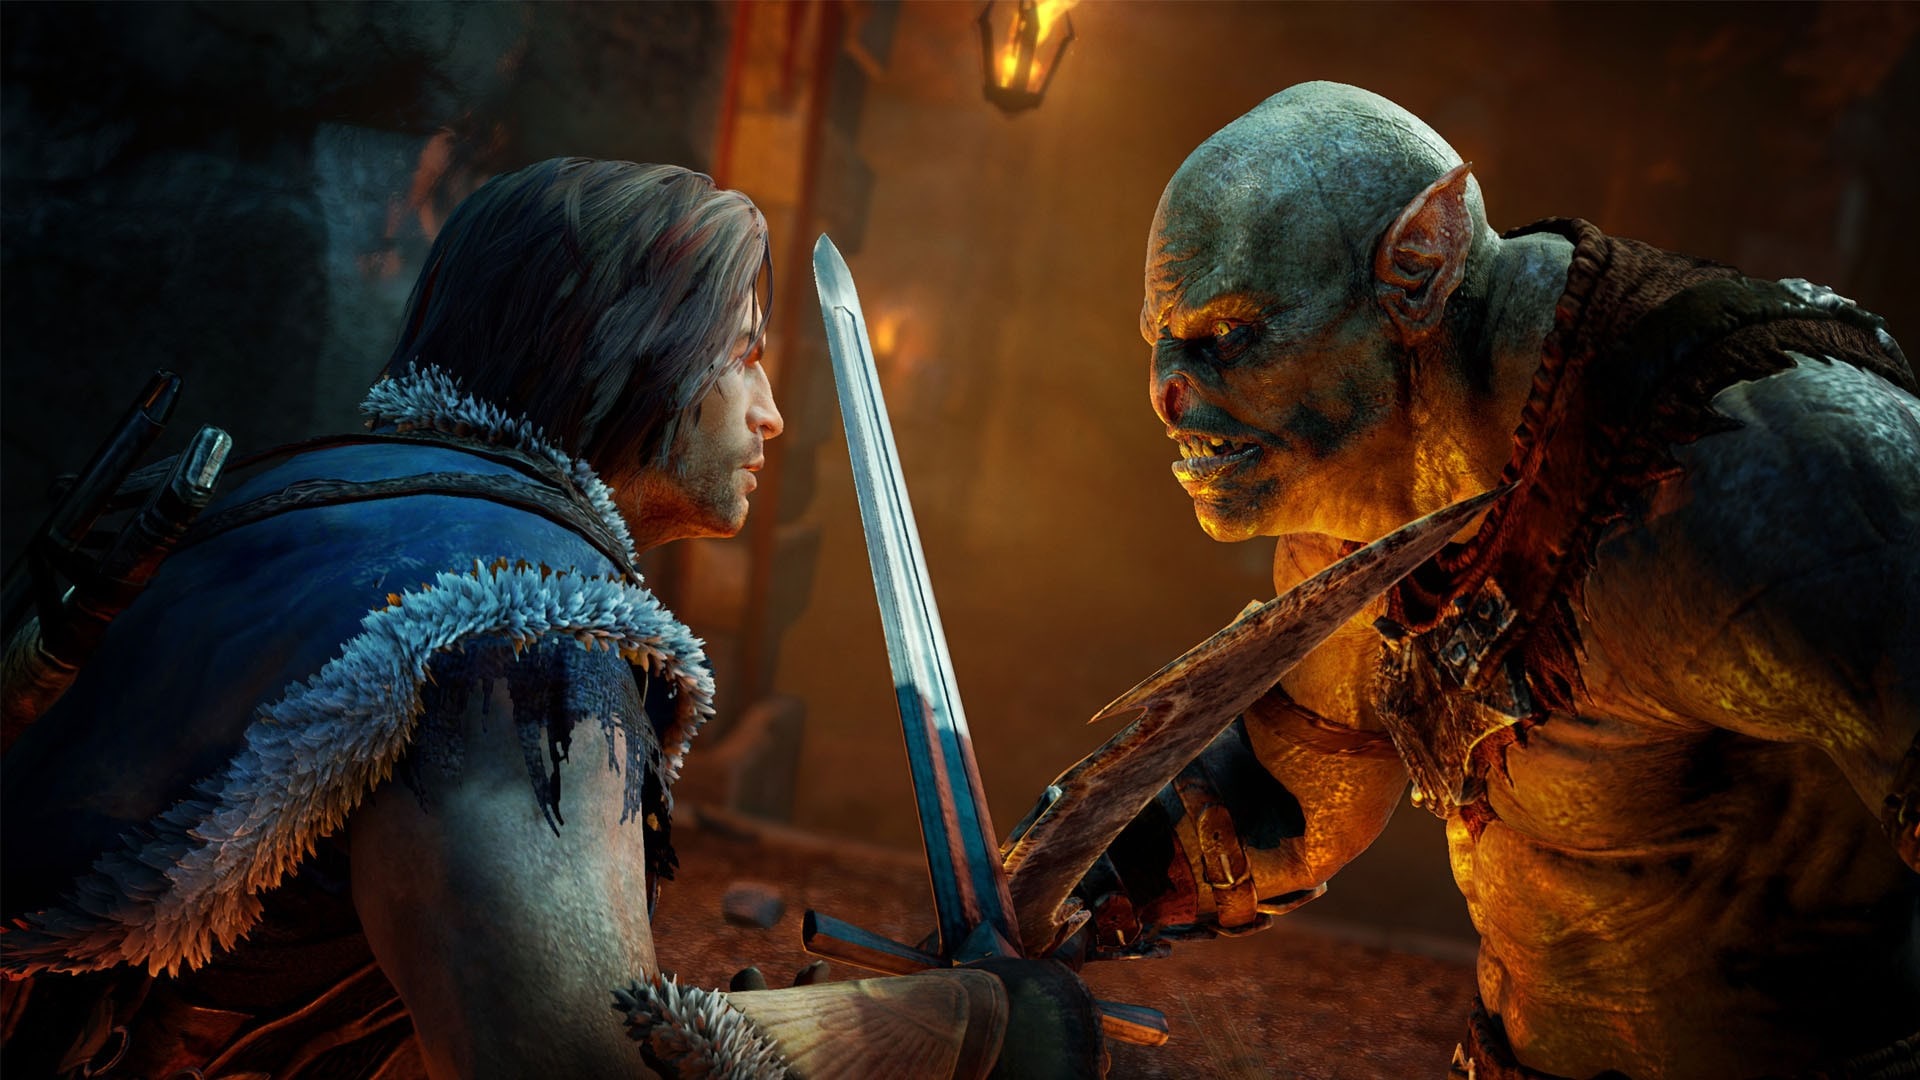 Middle-earth: Shadow of Mordor Gets Update and Deep Discount Ahead